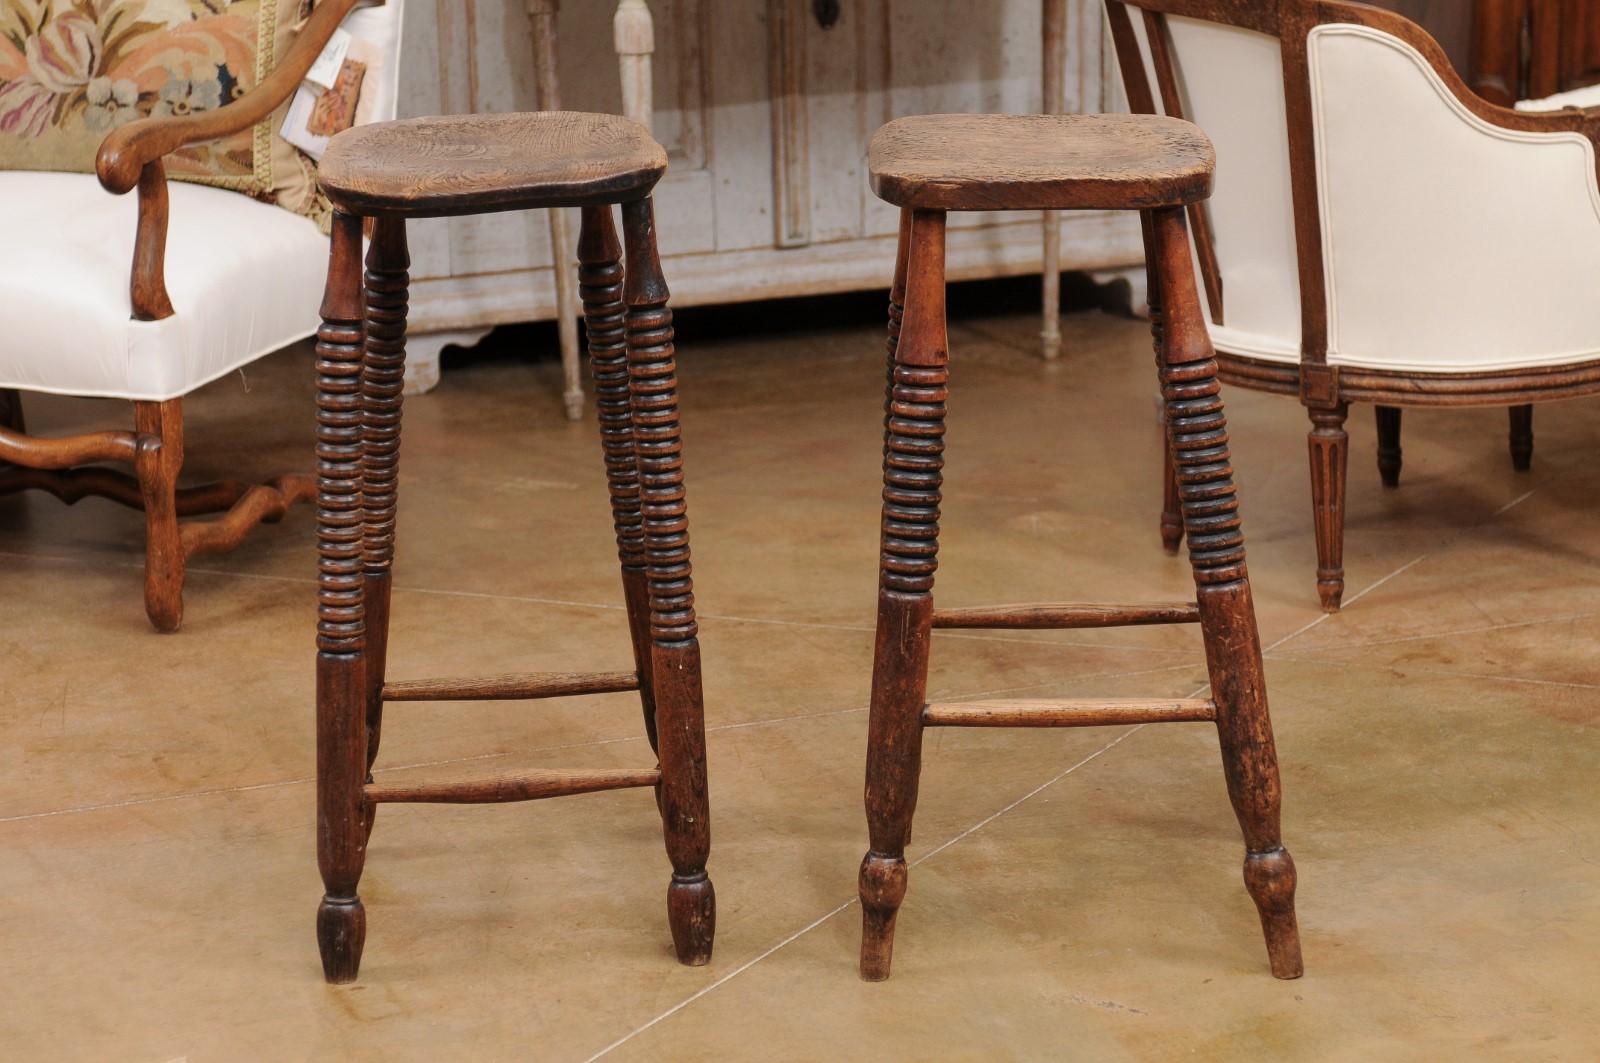 Pair of 1870s French Wooden Bar Stools with Spool Legs and Weathered Patina 1